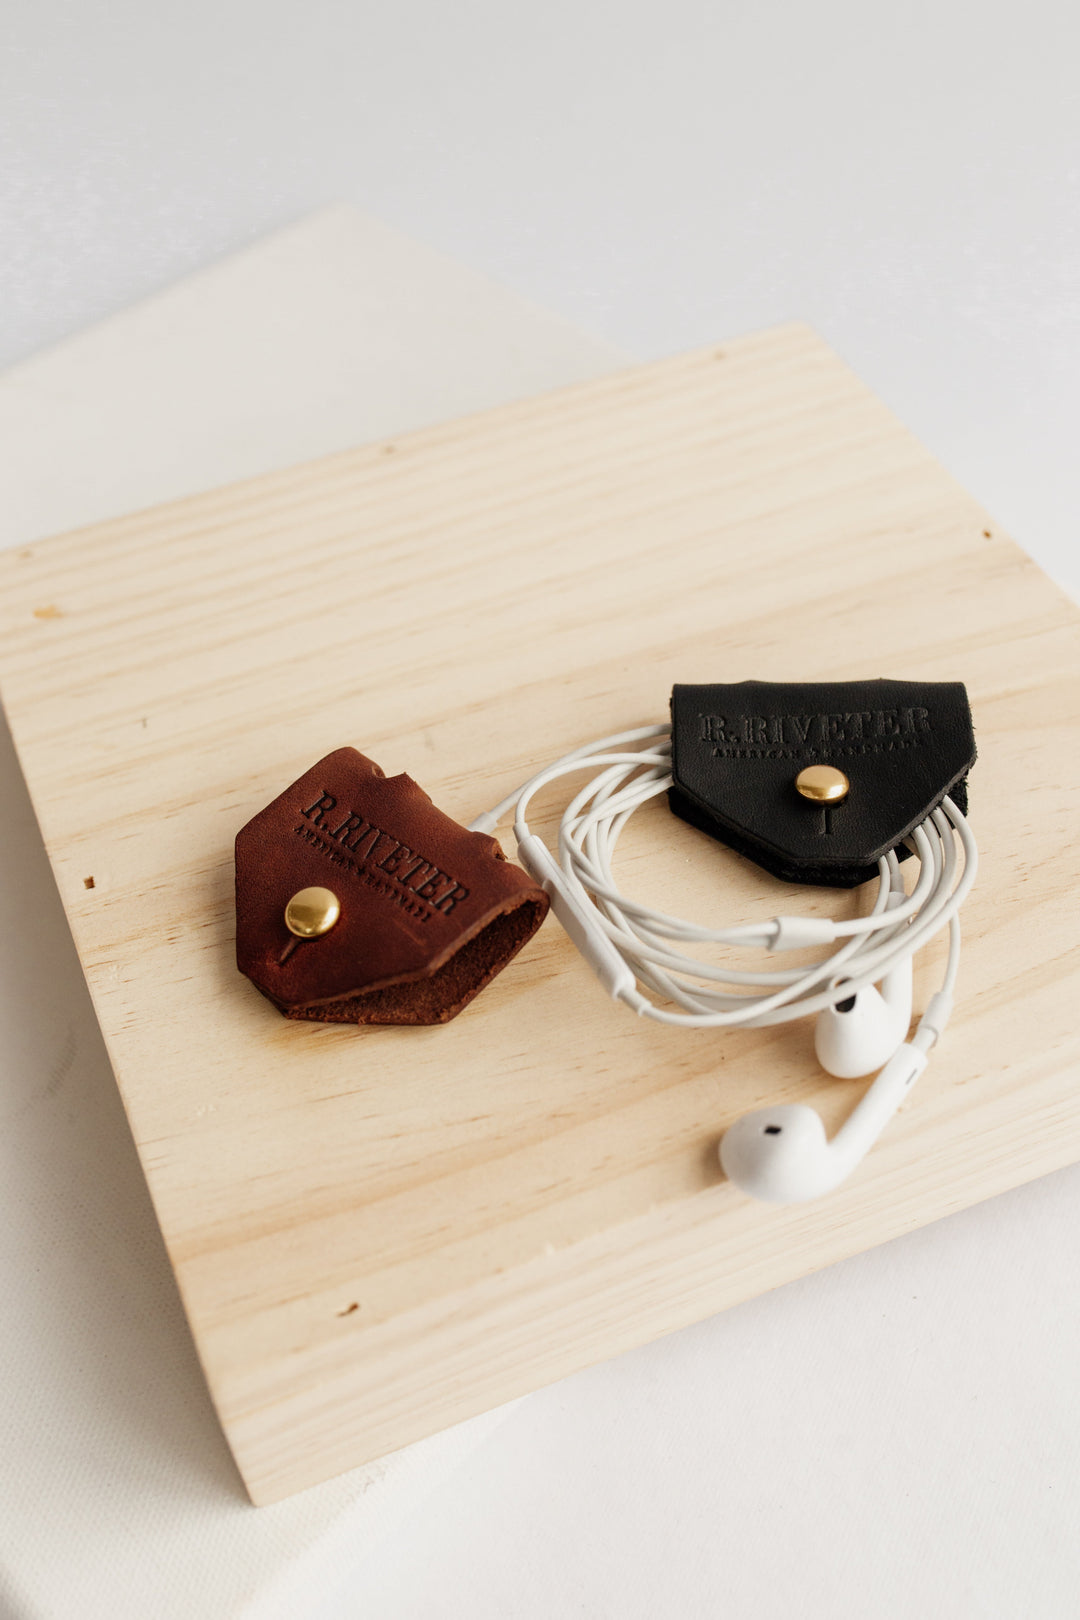 Leather Cord Holder